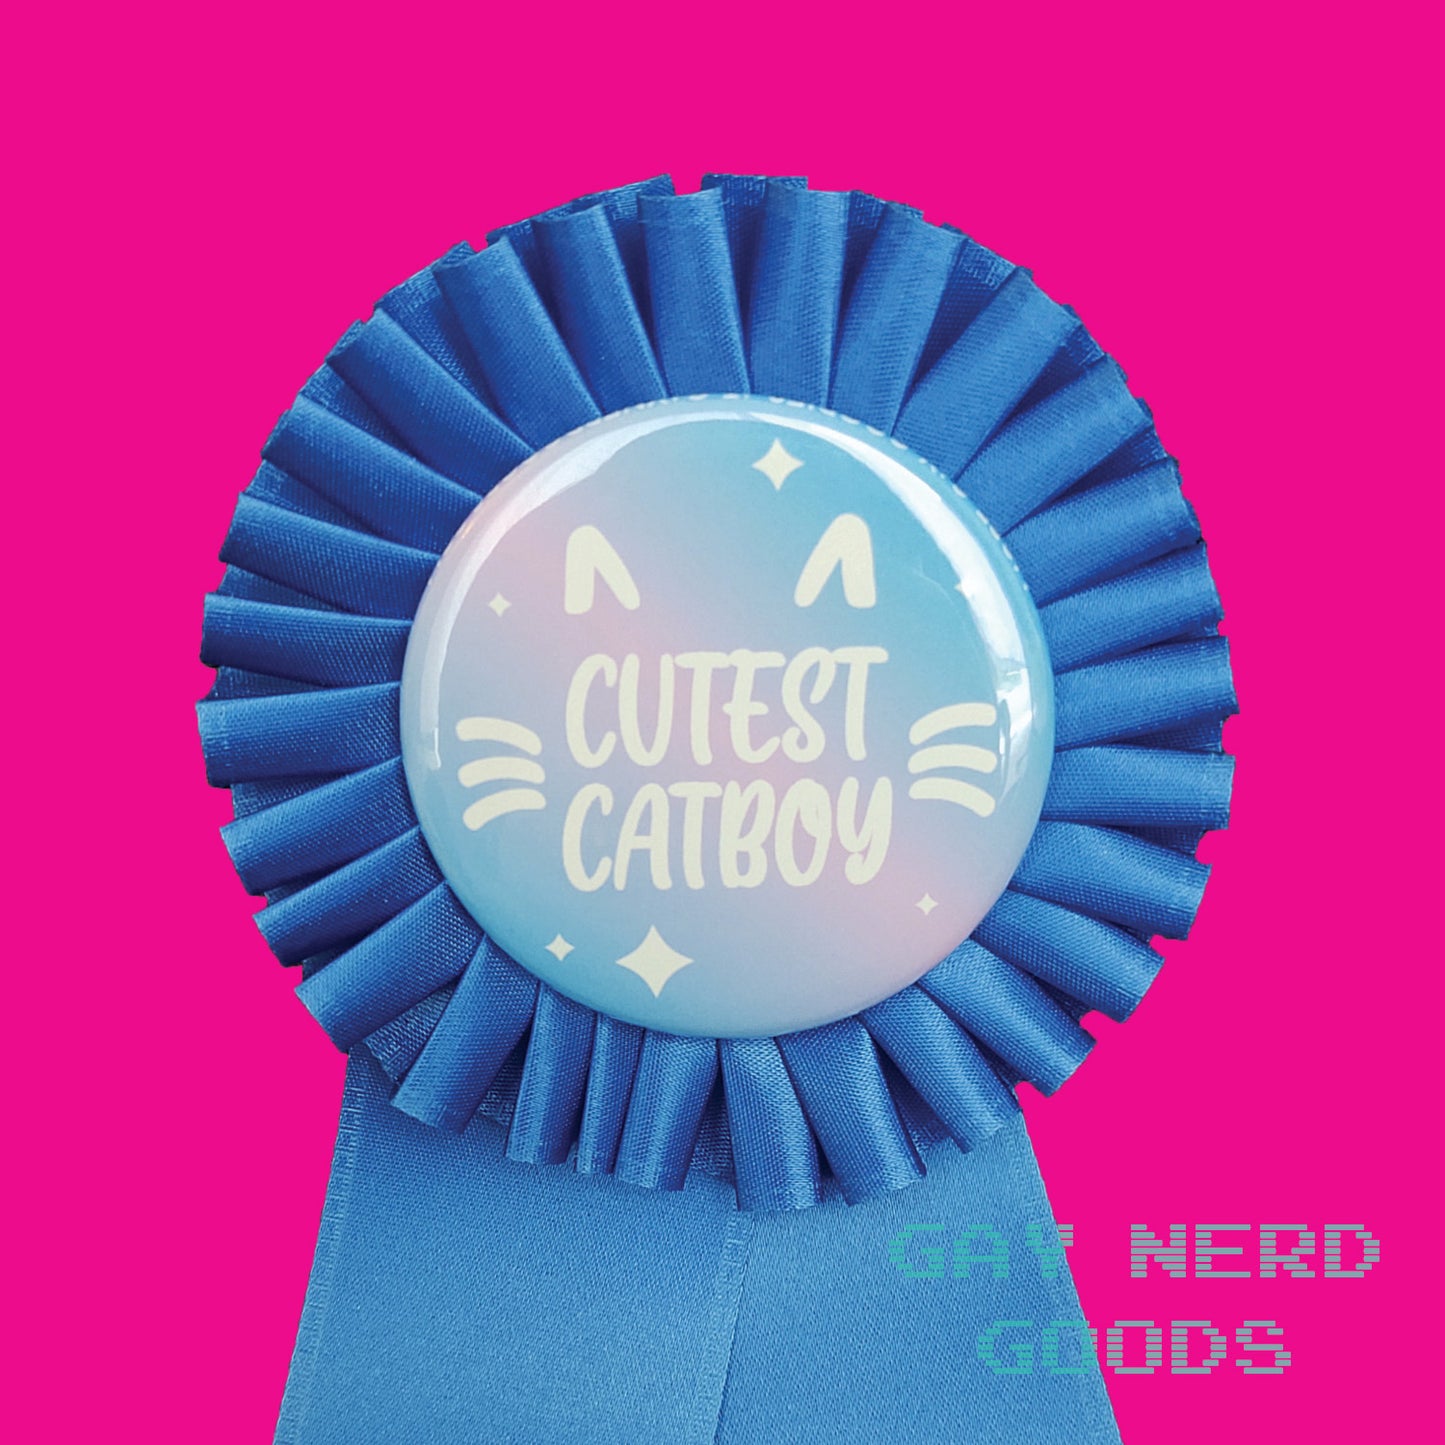 detail close up of the "cutest catboy" award ribbon. The text is white and surrounded by white cat ears and whiskers and white sparkles. The background is pink and blue gradient. The satin ribbon is dark blue